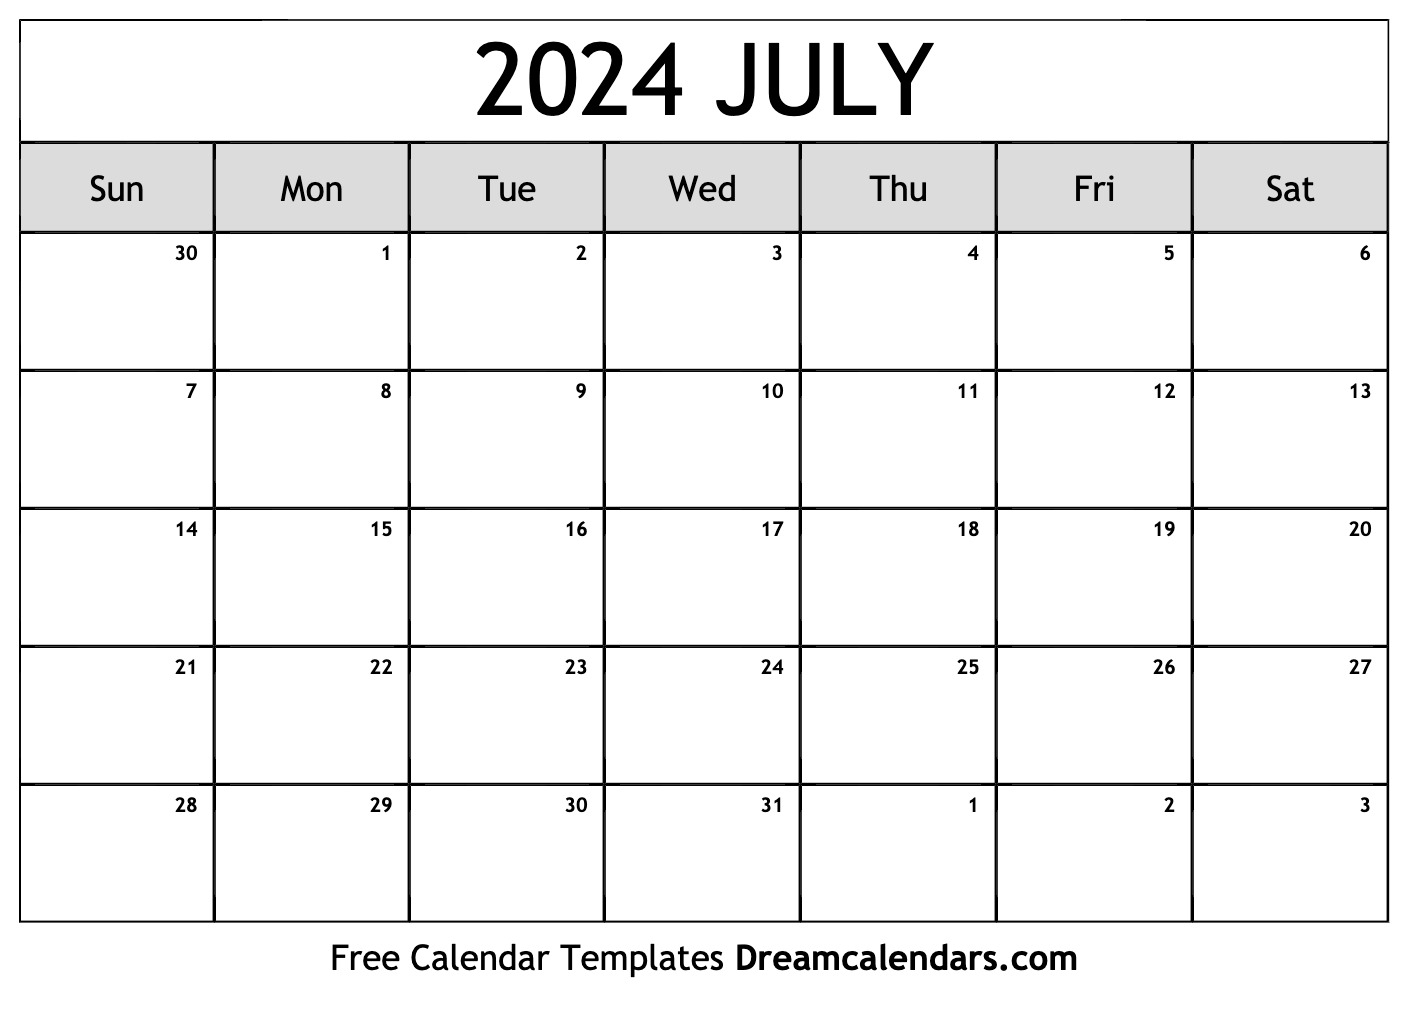 July 2024 Calendar | Free Blank Printable With Holidays for Free Printable Calendar For July 2024